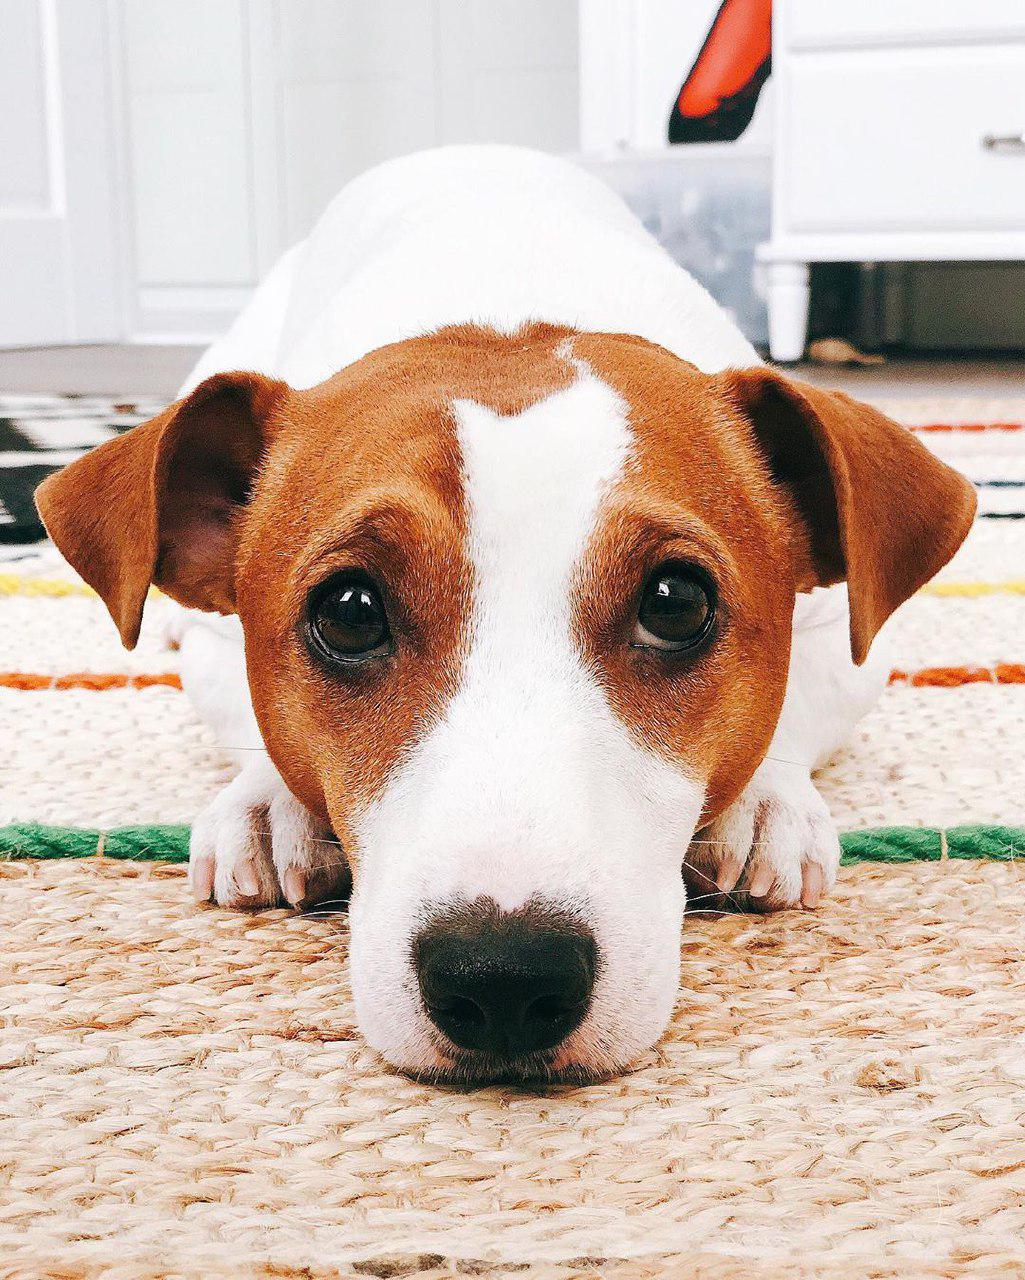 Jack Russell lying down on the floor with its begging face